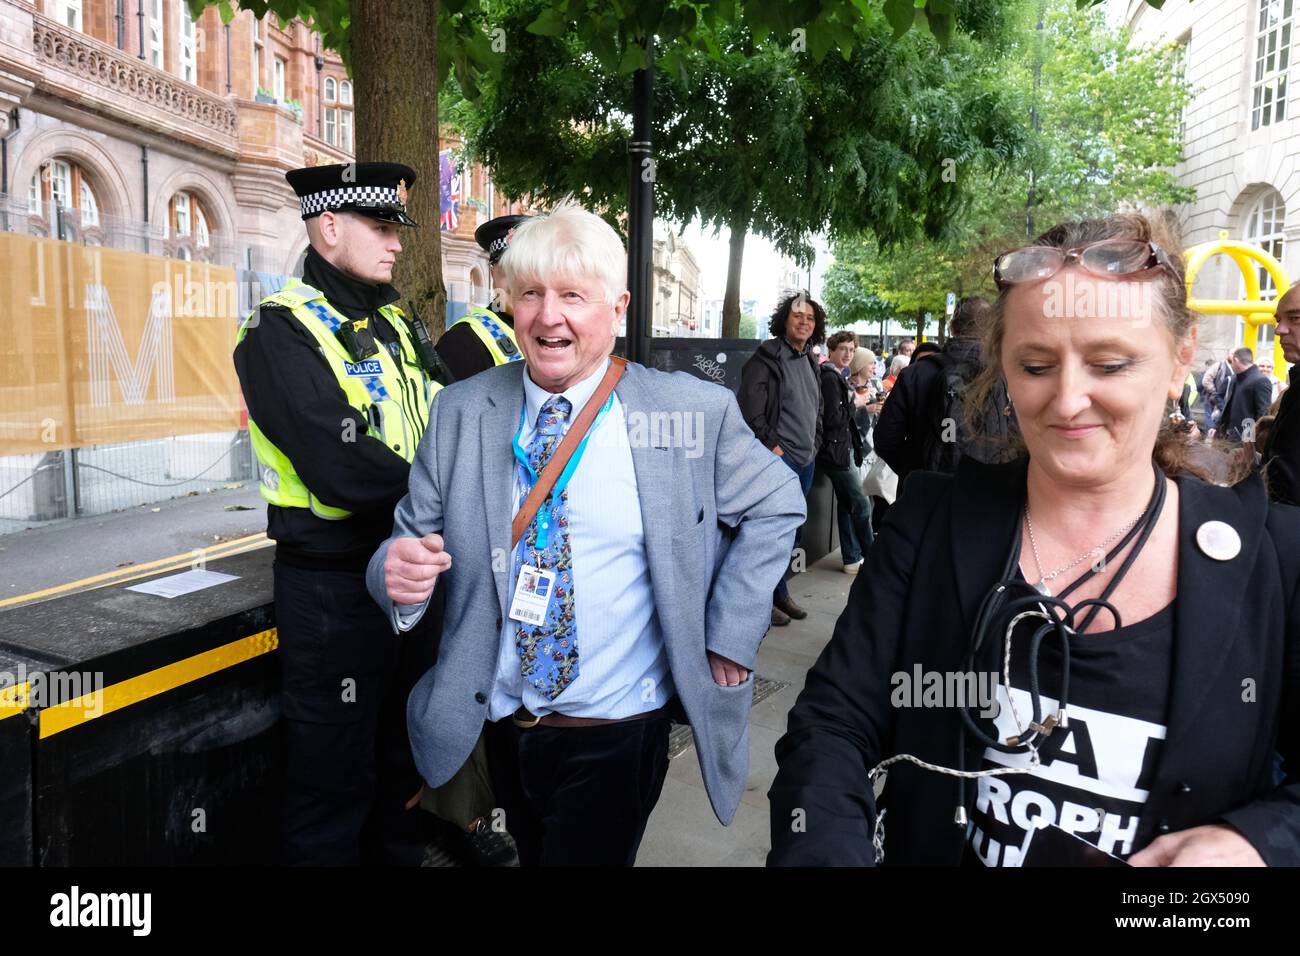 Manchester, UK – Monday 4th October 2021 – Stanley Johnson the father of Boris Johnson seen outside the Conservative Party Conference in Manchester. Photo Steven May / Alamy Live News Stock Photo